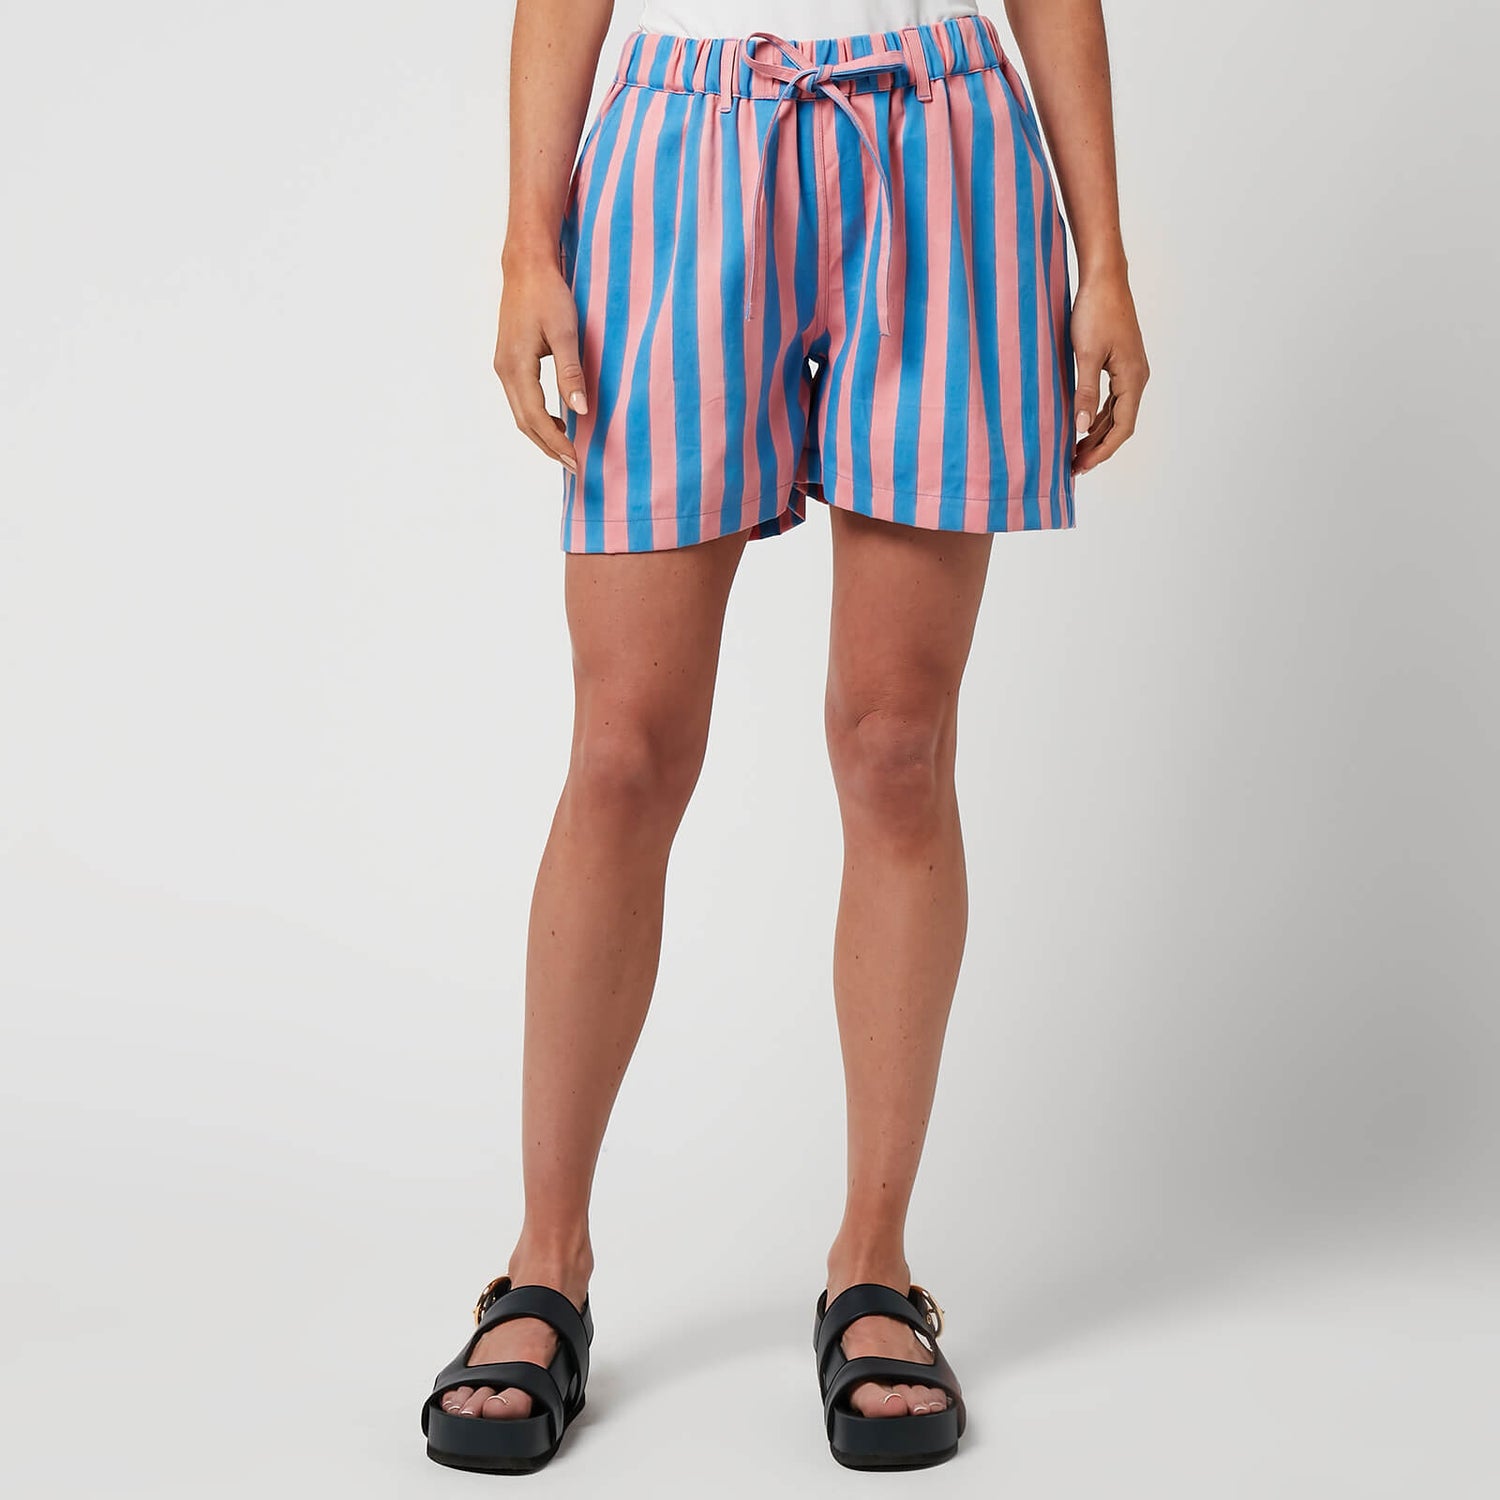 SZ Blockprints Women's Shorts In Thick Stripes - Faded Rose & London Blue - M